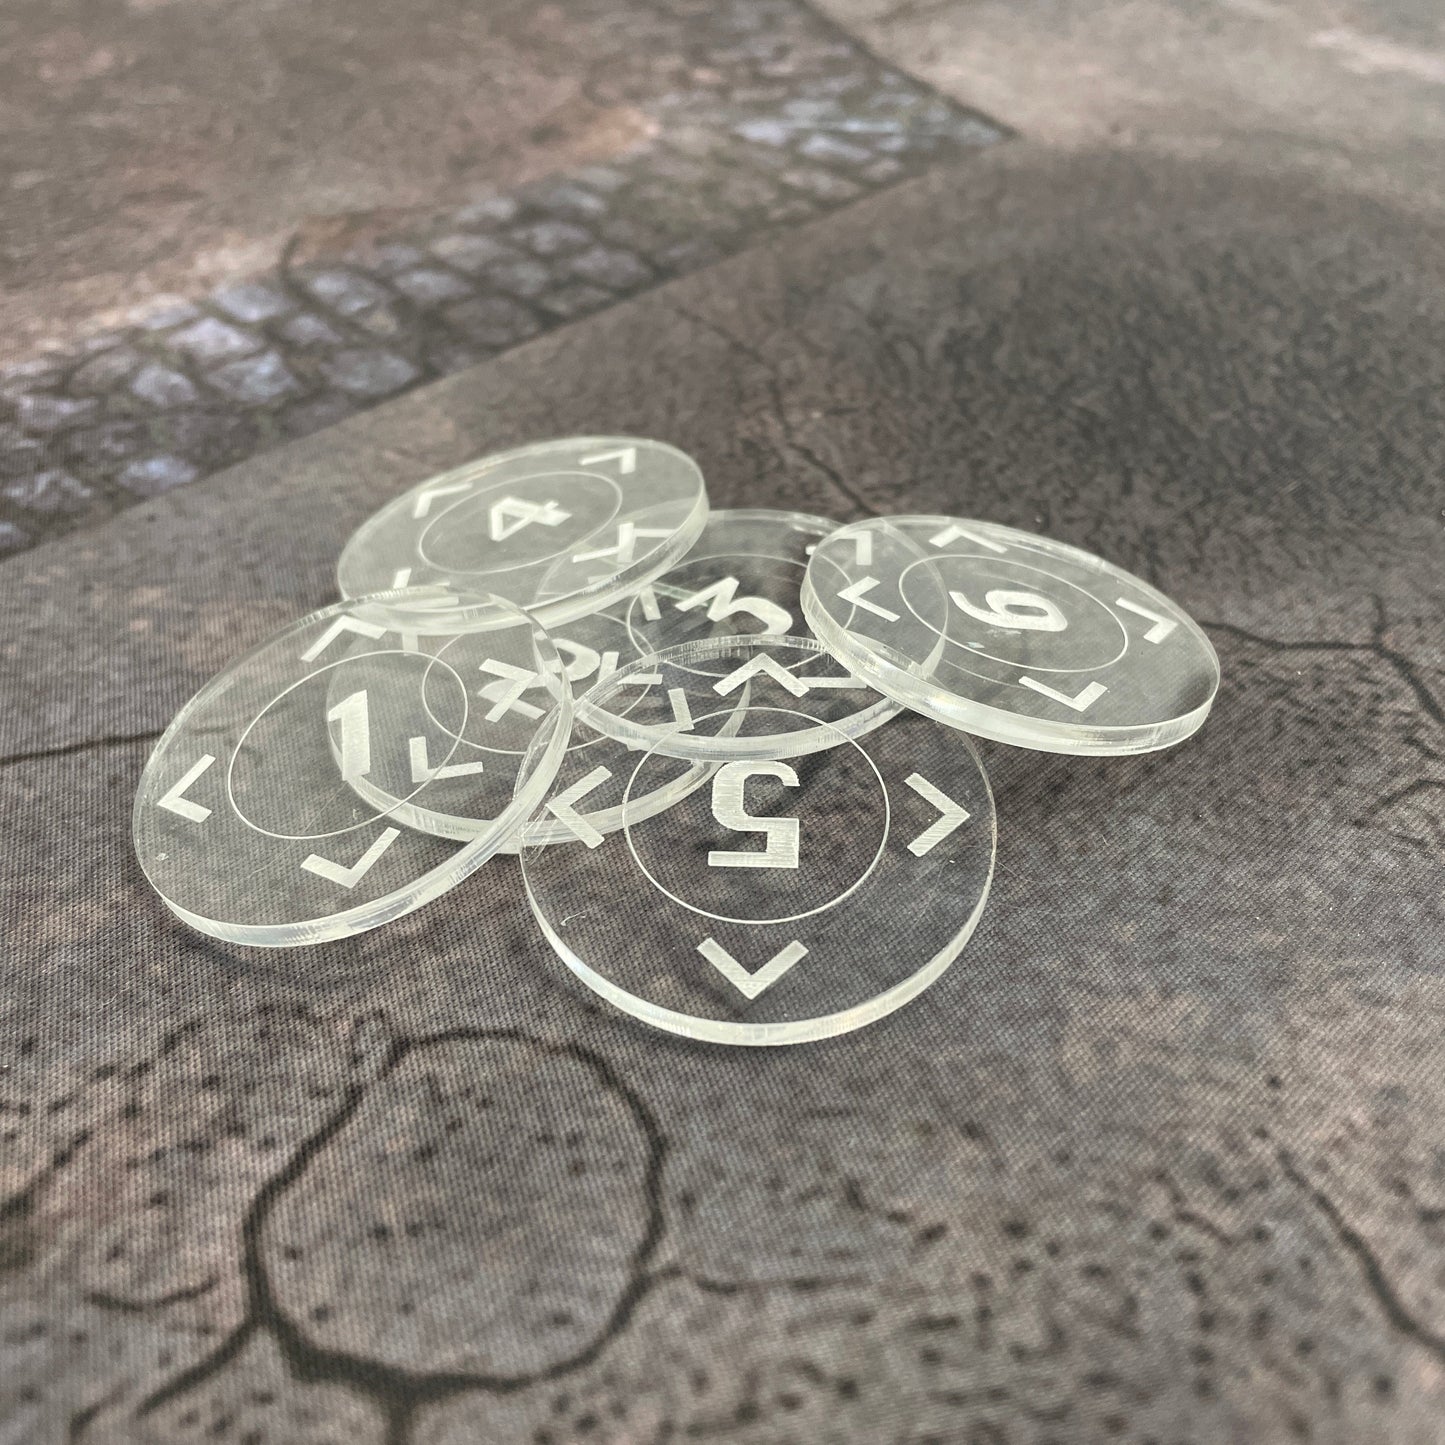 Wargaming objective markers